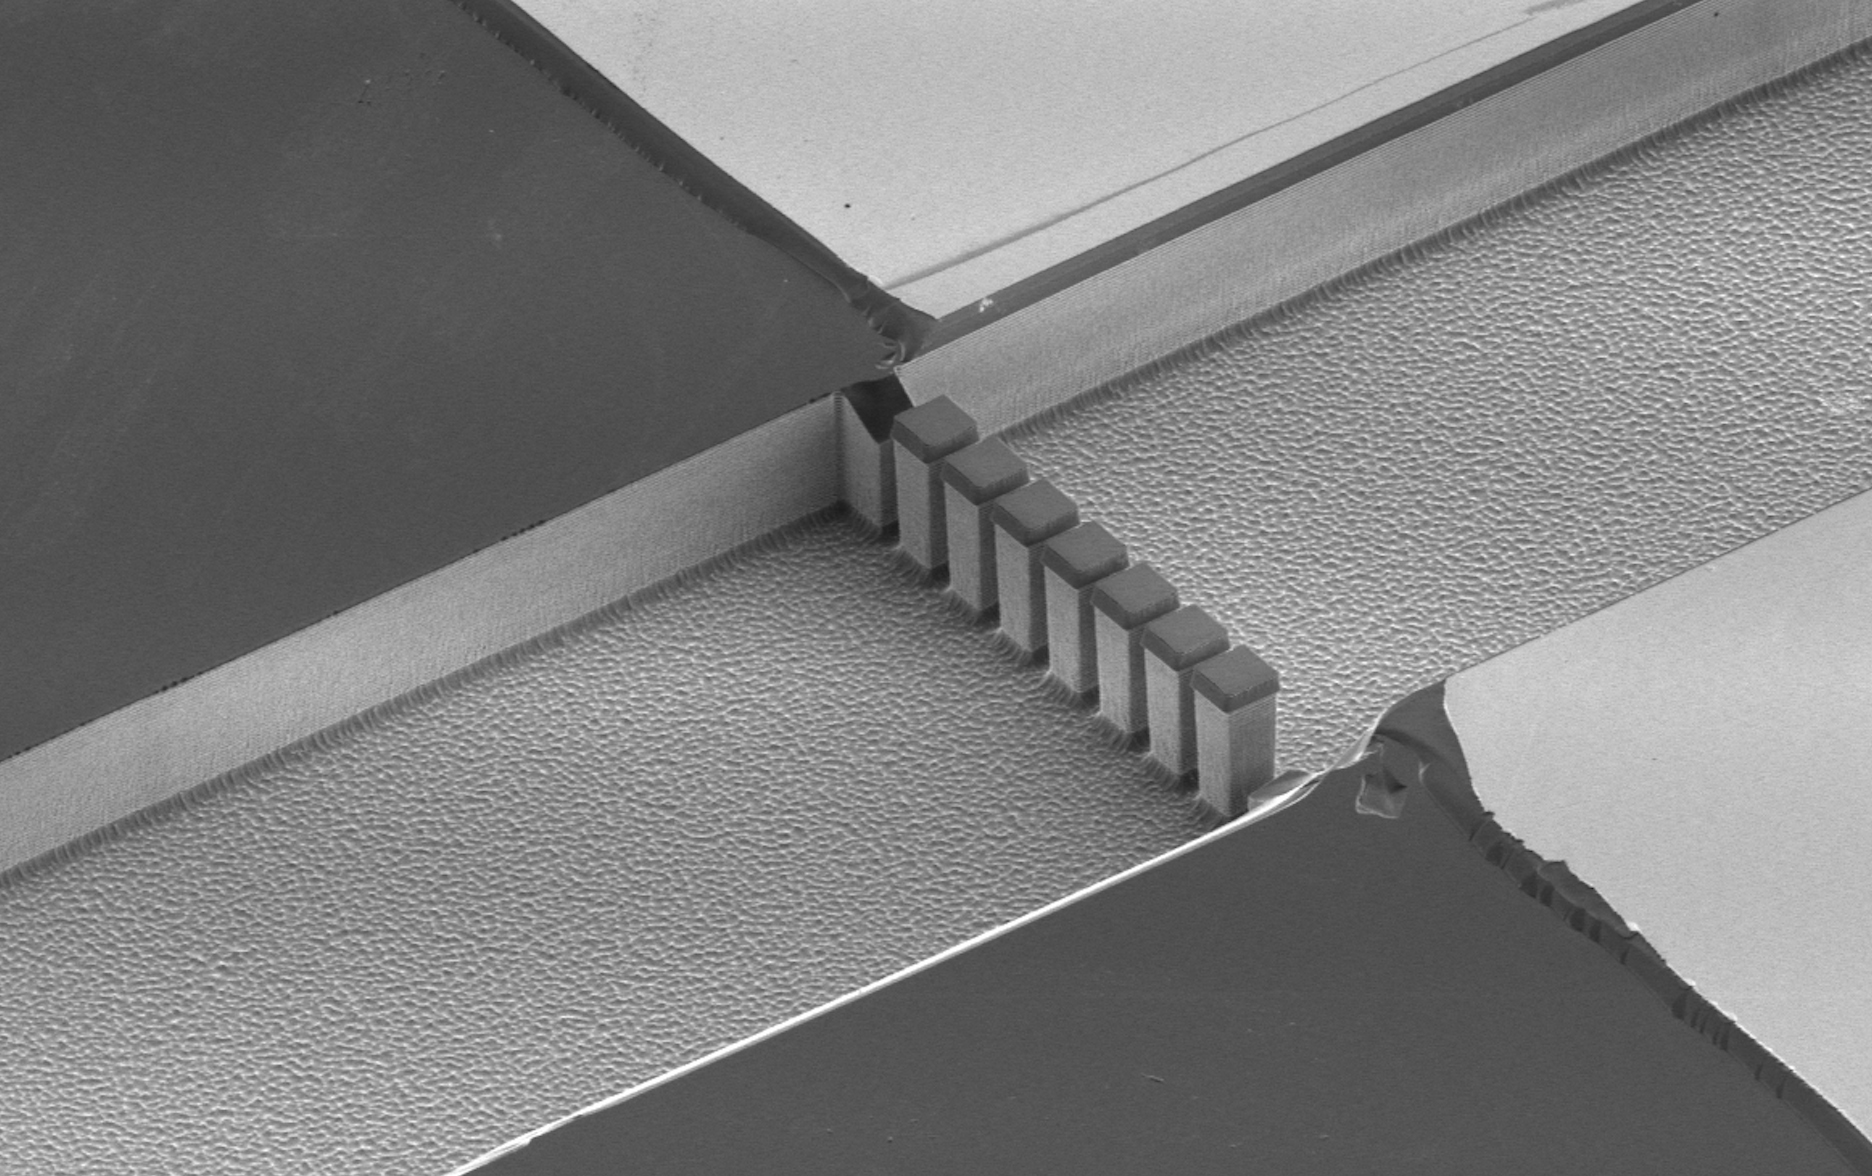 The cell immobilization features inside the cell processing device: These 30 micron tall pillars are etched into silicon with a mere three microns between each column. The cells are approximately 10 microns and can’t get through the narrow openings. More than just a filter, these features allow researchers to concentrate the cells before extracting their contents.